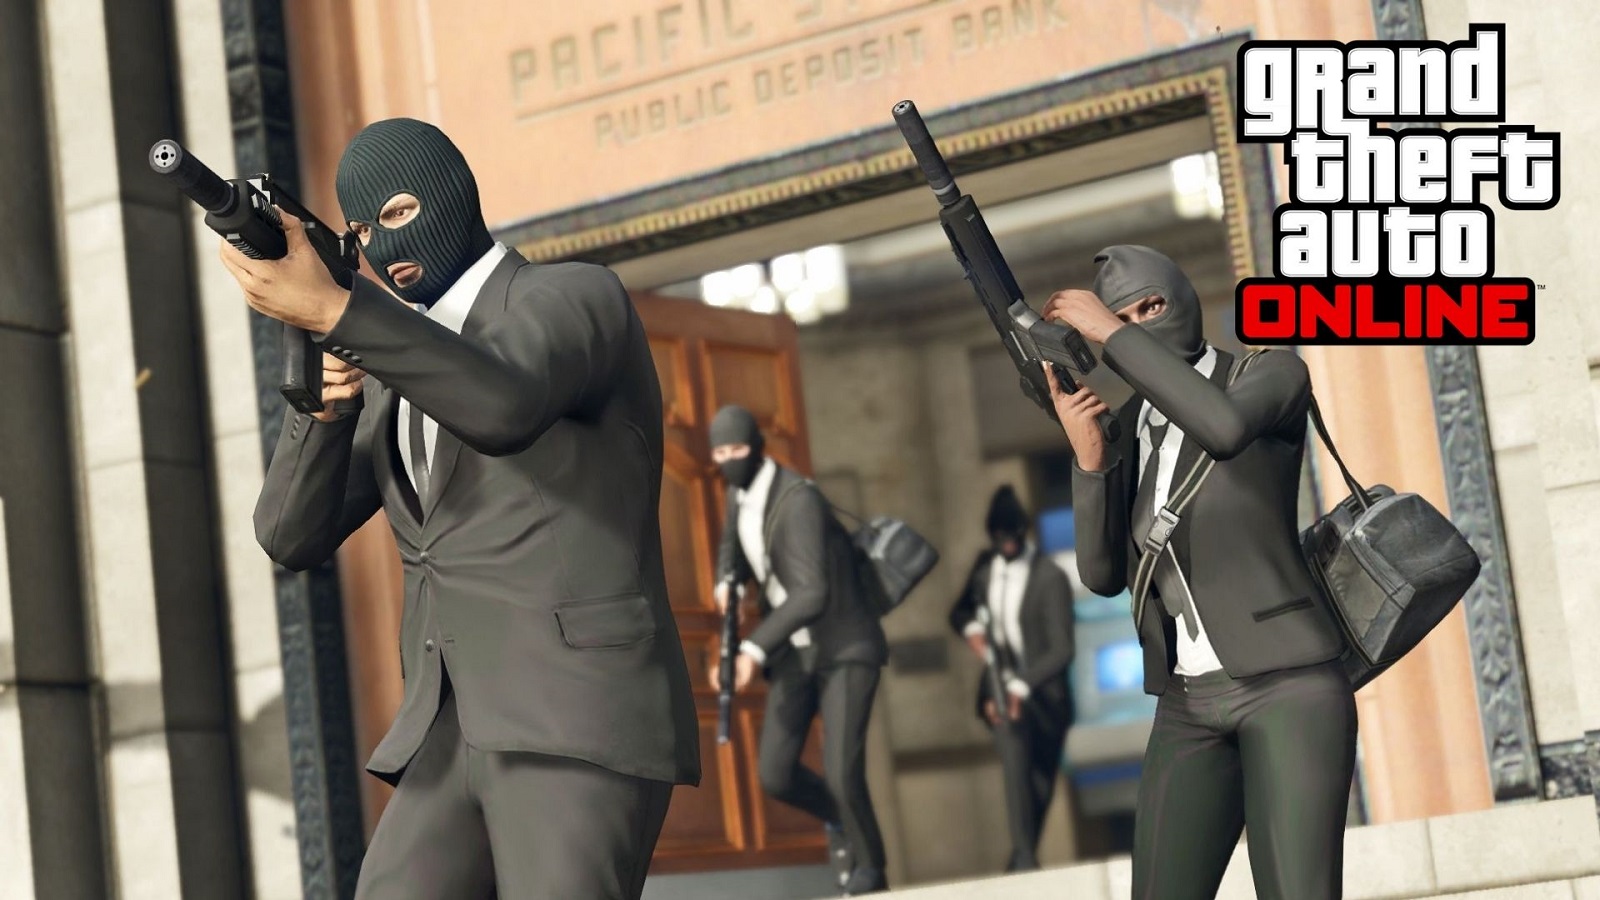 Rockstar Gives Away FREE Money in GTA Online! Here's How You Can Claim the  Offer! 